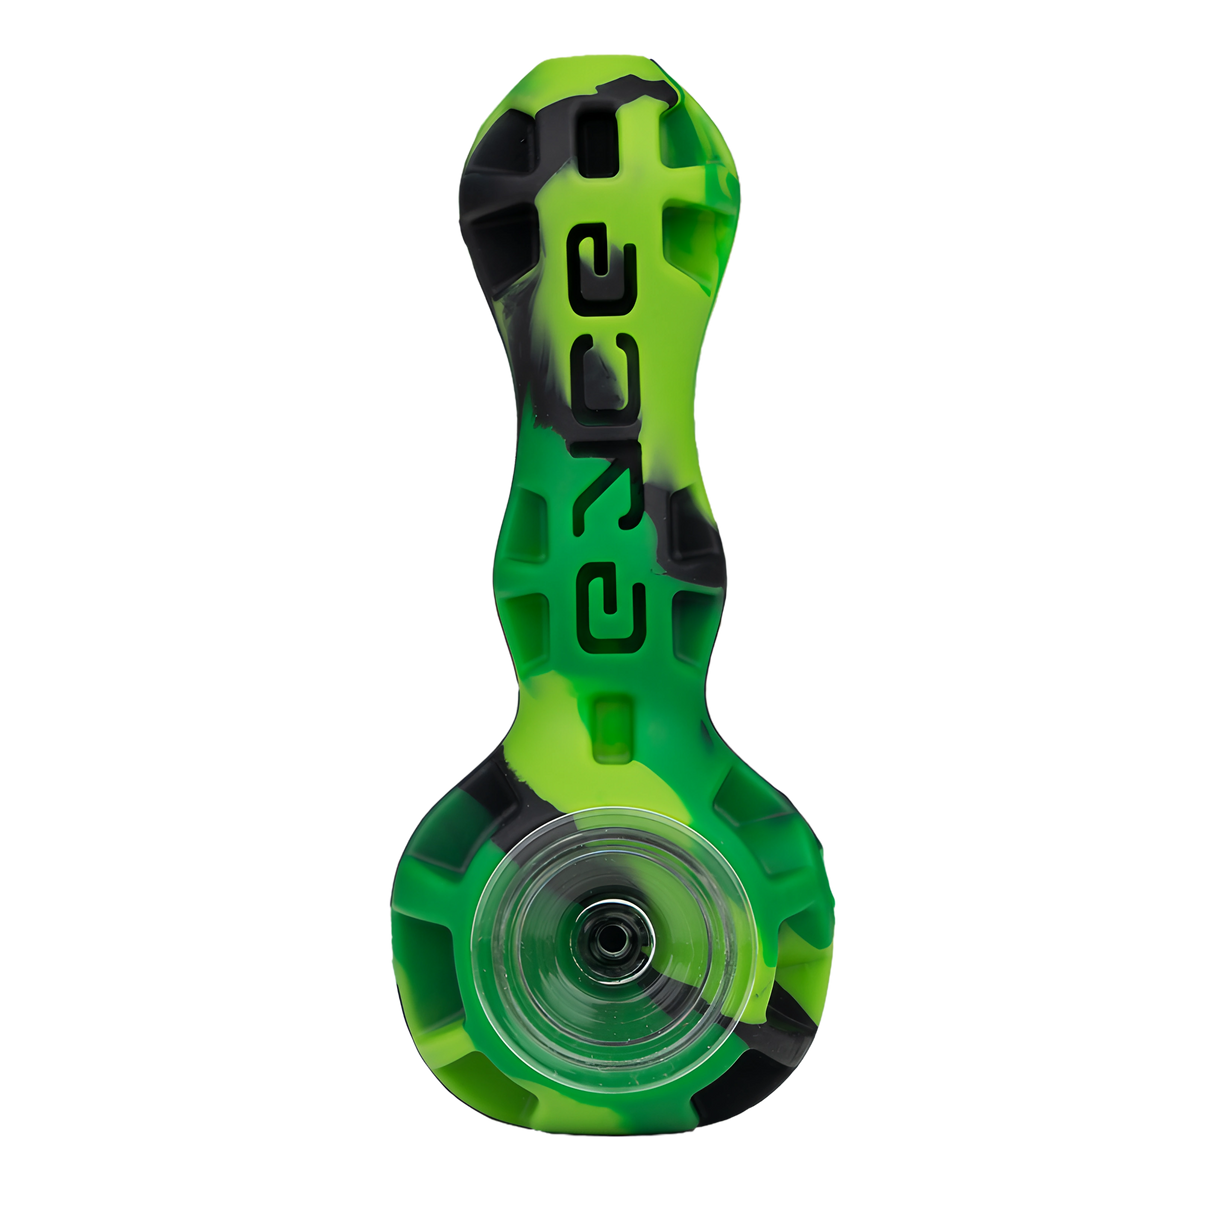 EYCE Spoon Hand Pipe in Jungle Green Camo, 4" Silicone with Durable Design, Front View